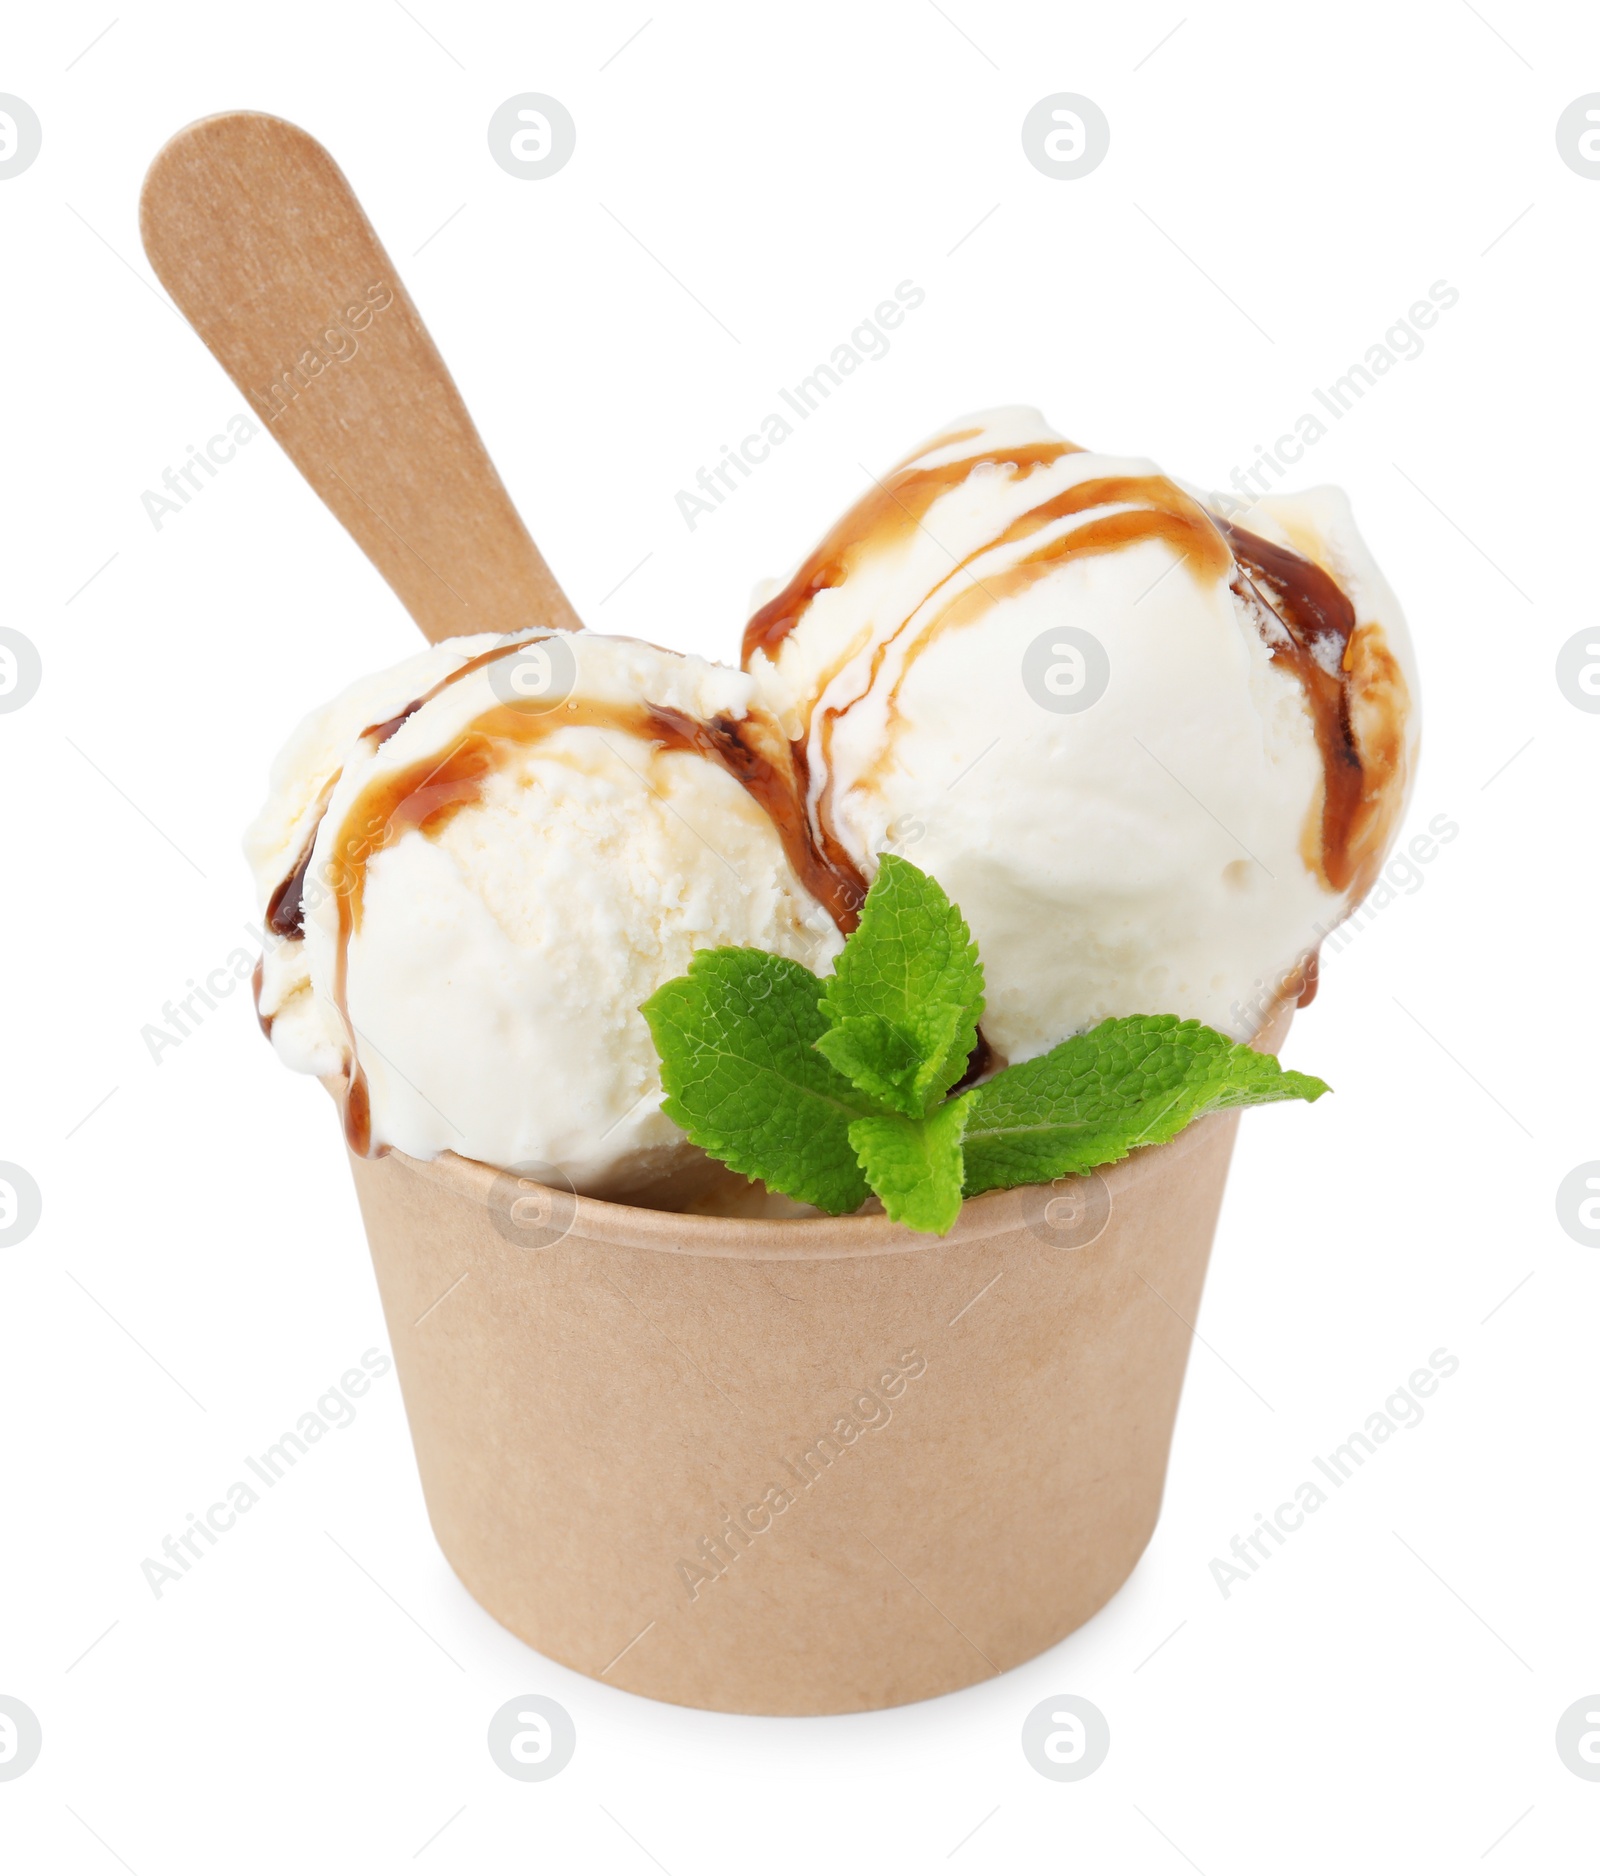 Photo of Scoops of delicious ice cream with caramel sauce and mint in paper cup isolated on white